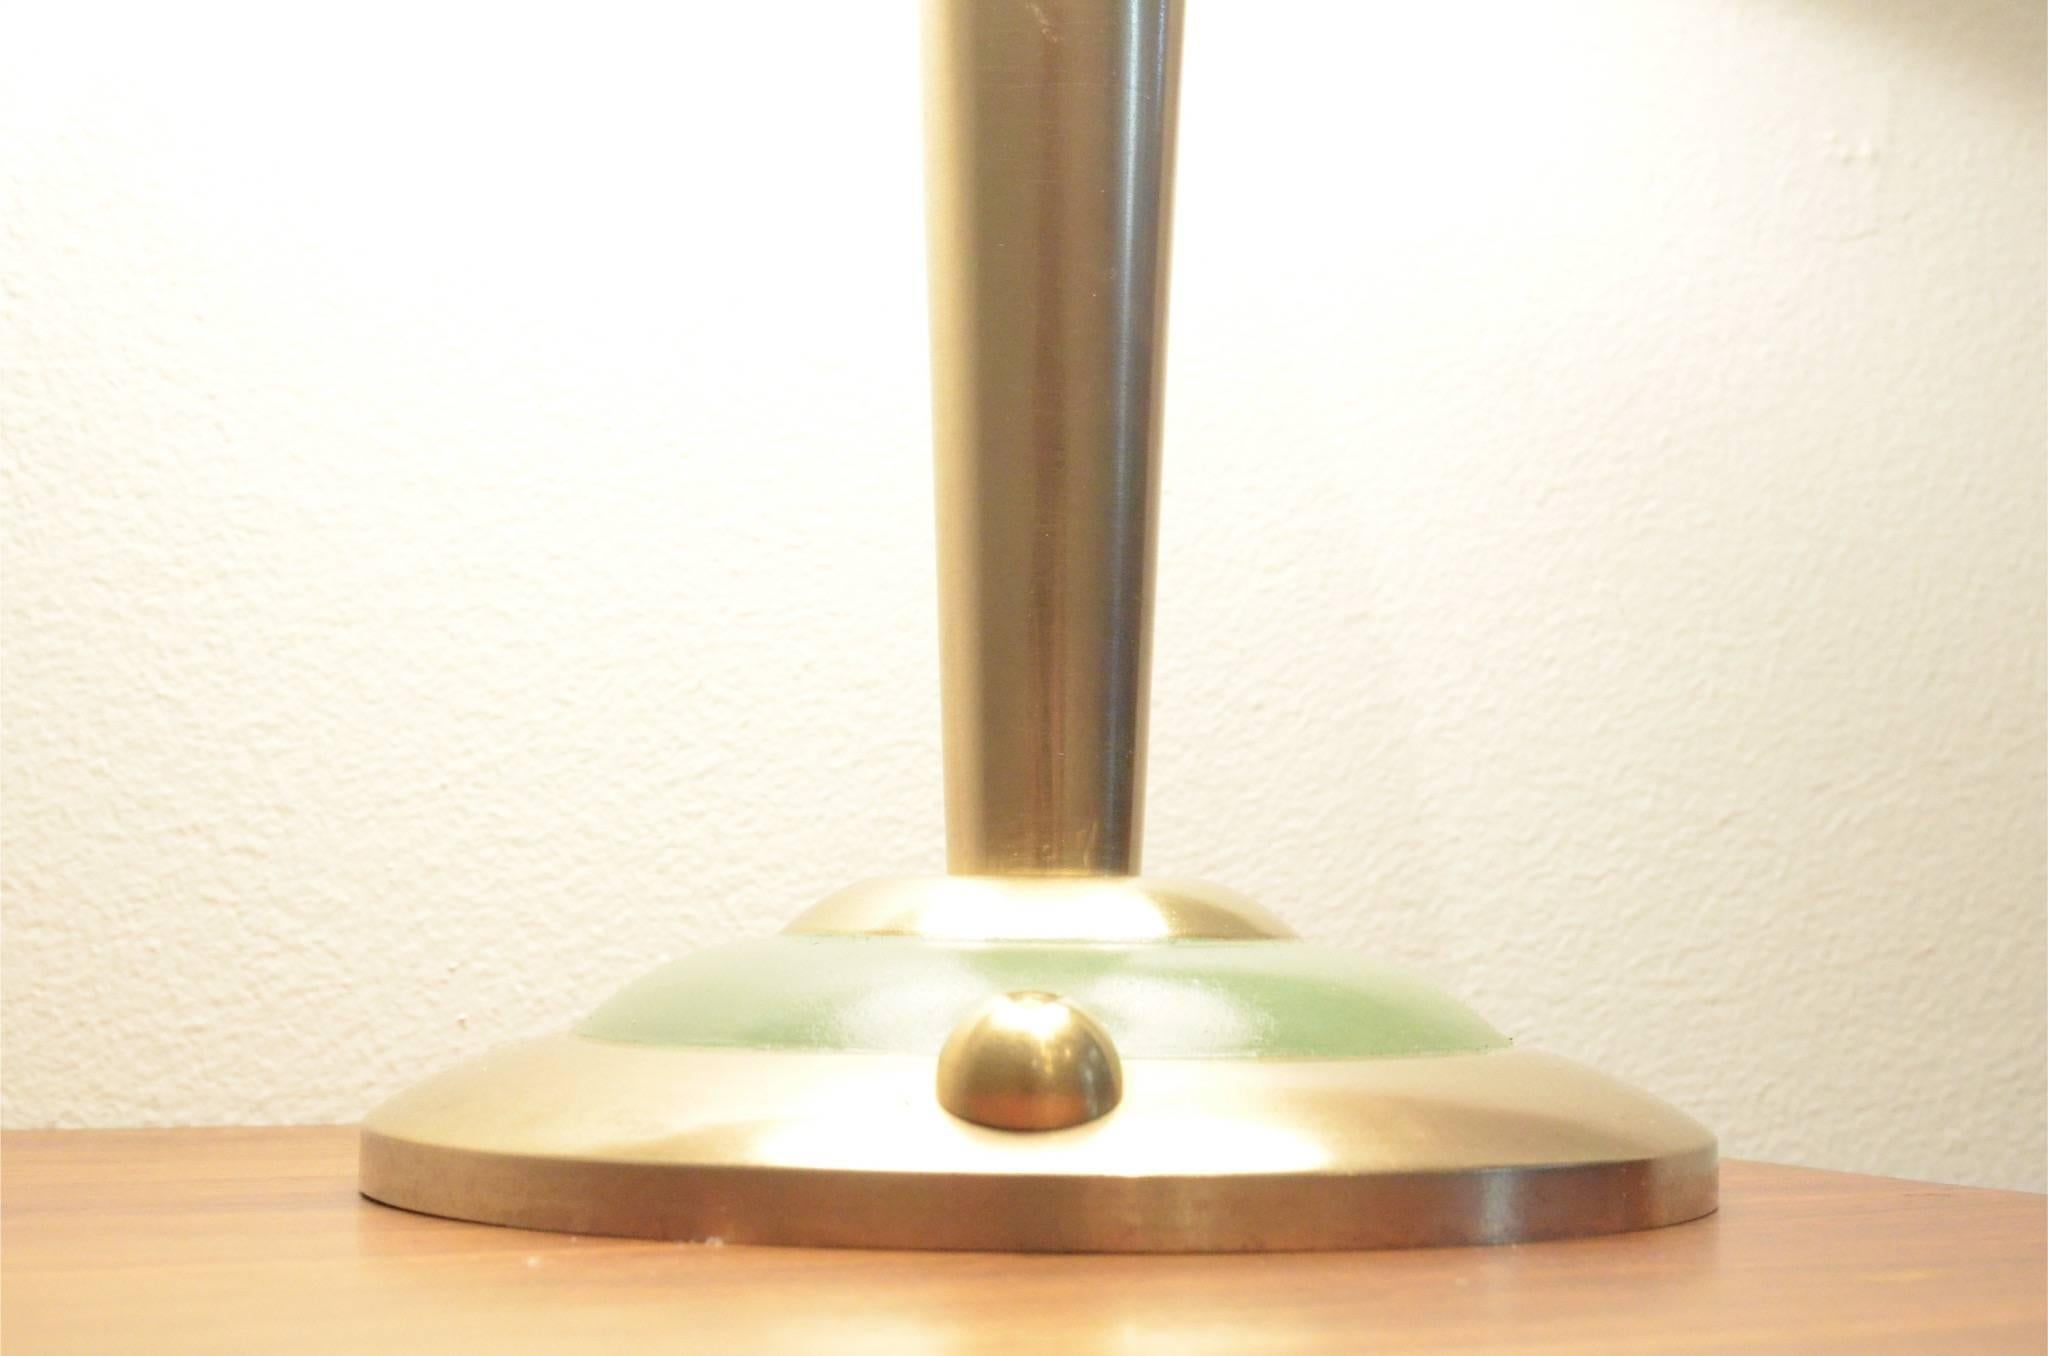 Nice Art Deco period table lamp composed of full brass base / rod / dome with accents of pastel green paint.